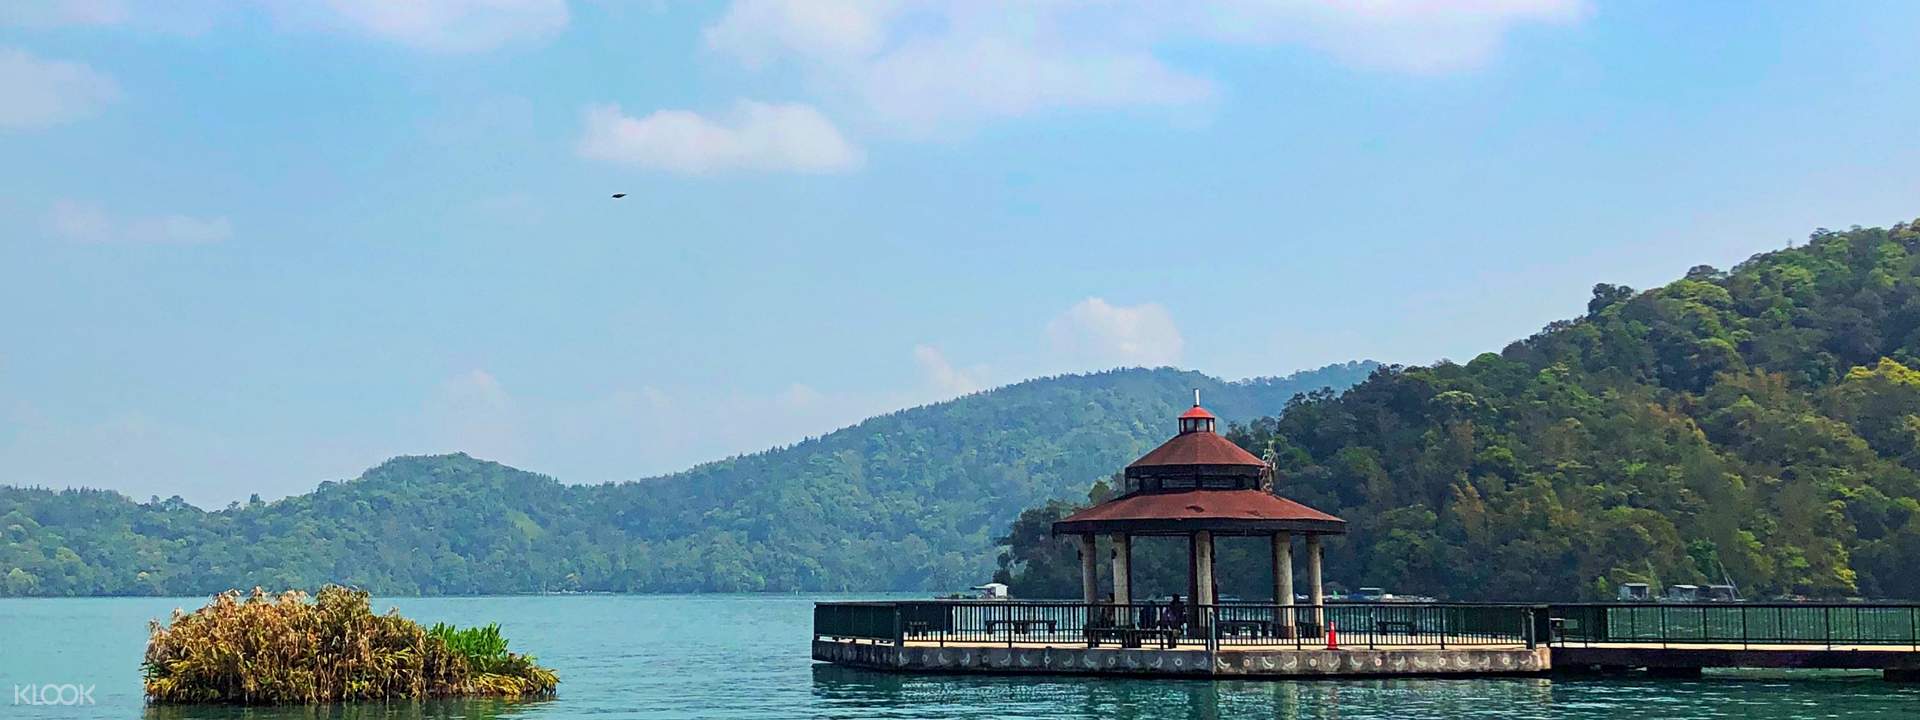 Sun Moon Lake Hop On Hop Off Boat Day Pass, Taichung ...